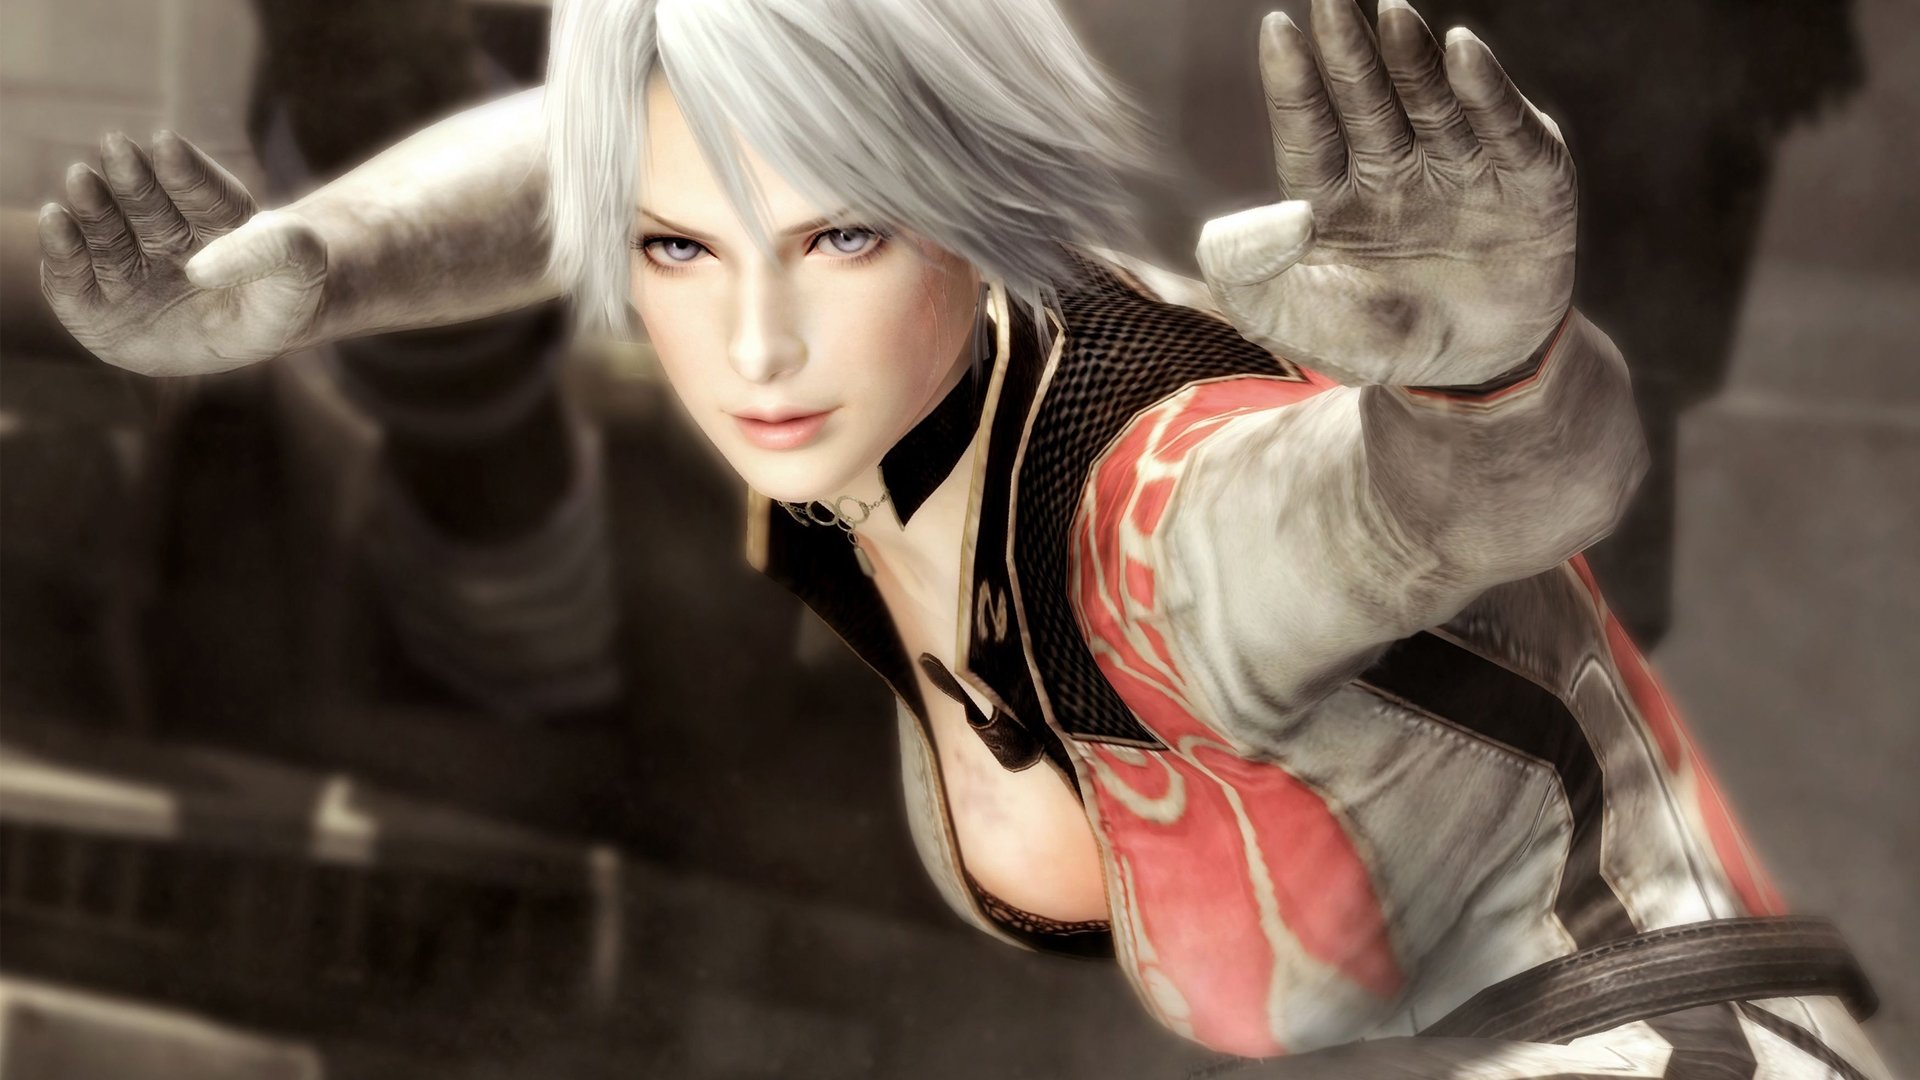 Best Dead Or Alive 5 wallpaper ID:10116 for High Resolution full hd 1080p computer